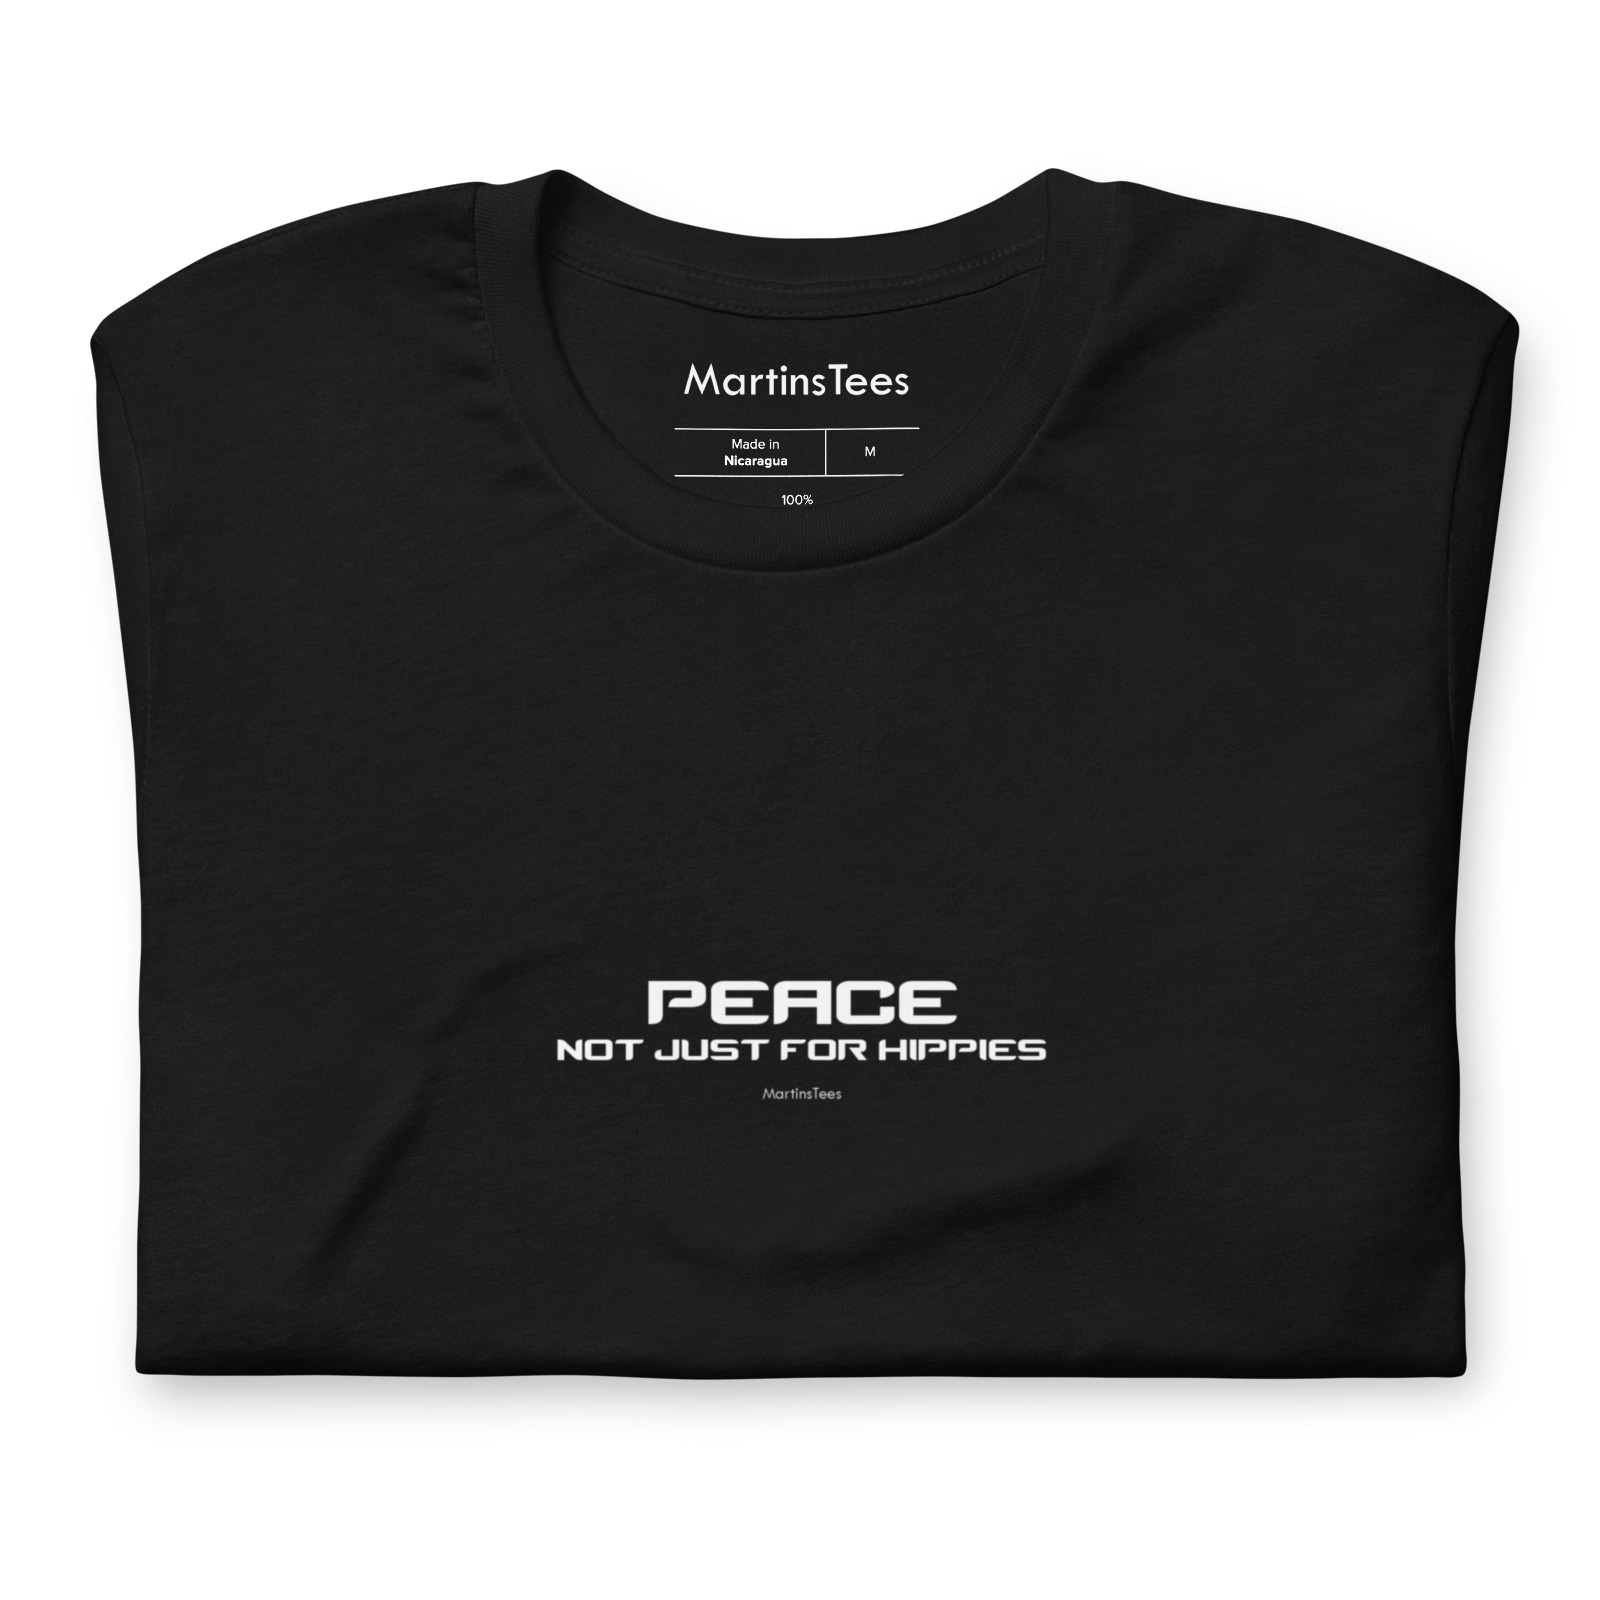 T-shirt: PEACE - NOT JUST FOR HIPPIES